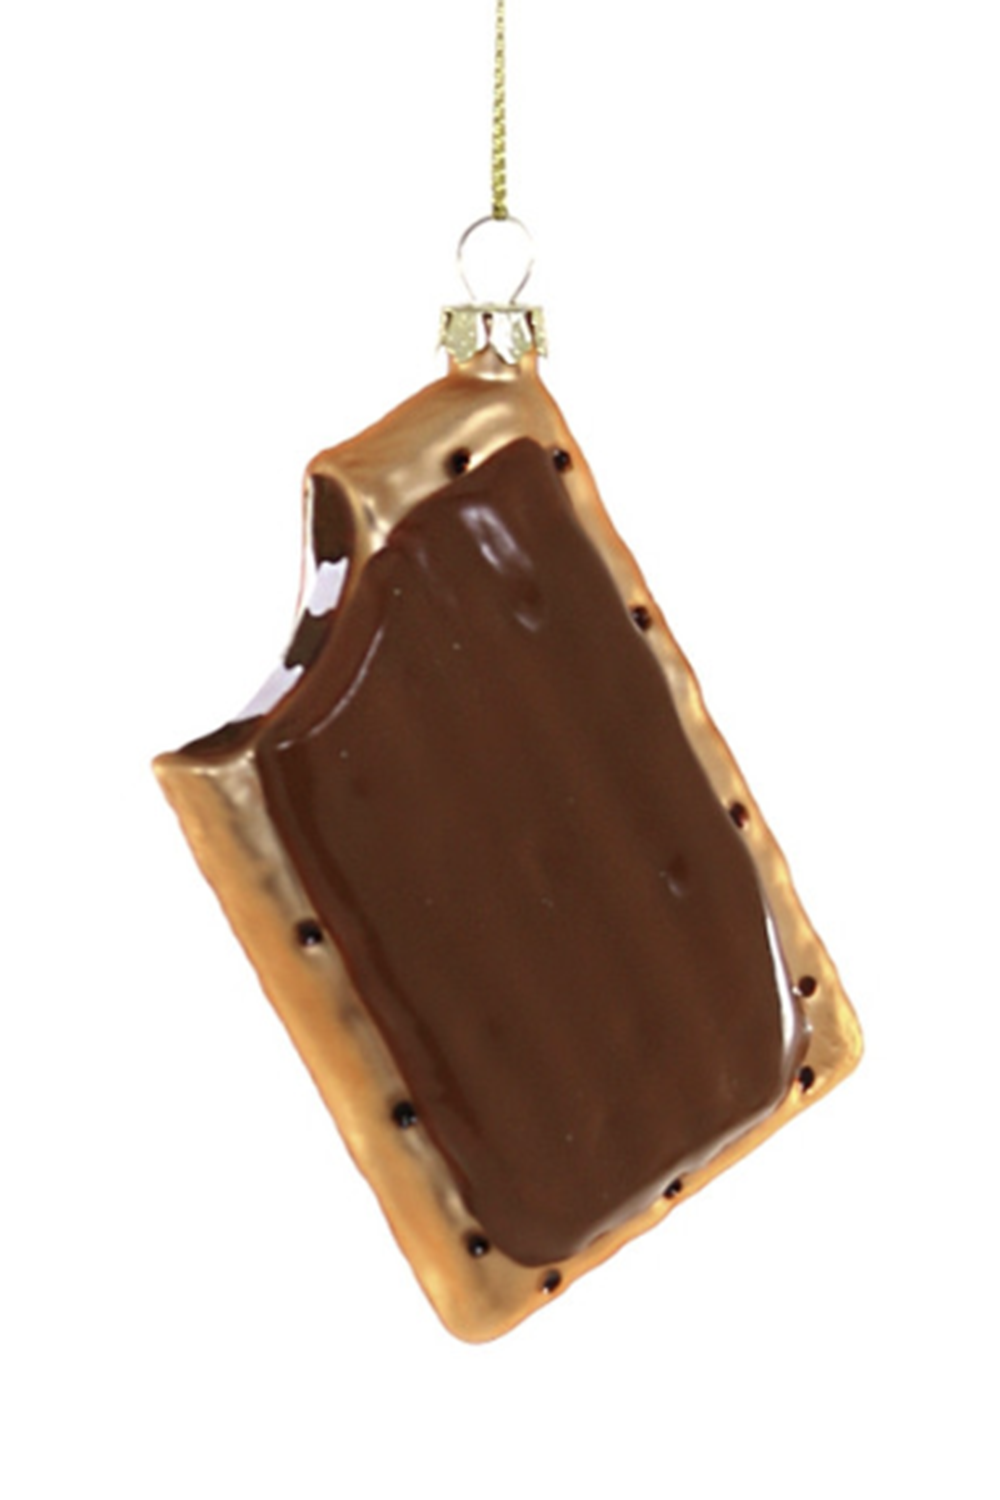 Glass Ornament - Toaster Pastry Smore